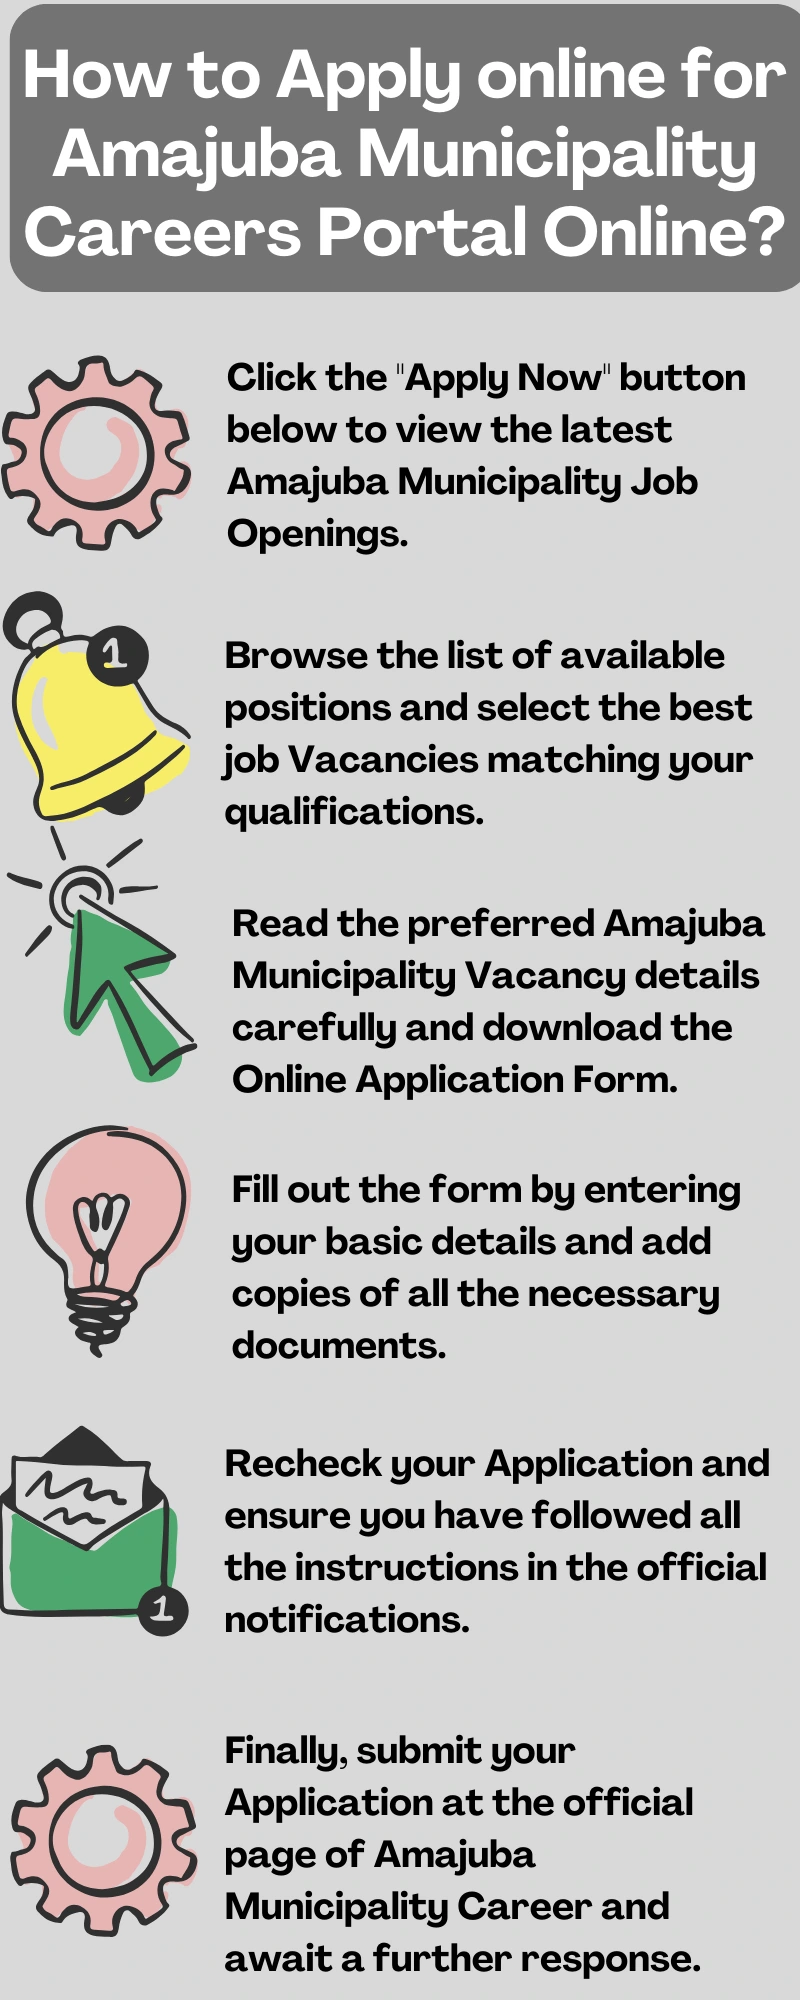 How to Apply online for Amajuba Municipality Careers Portal Online?